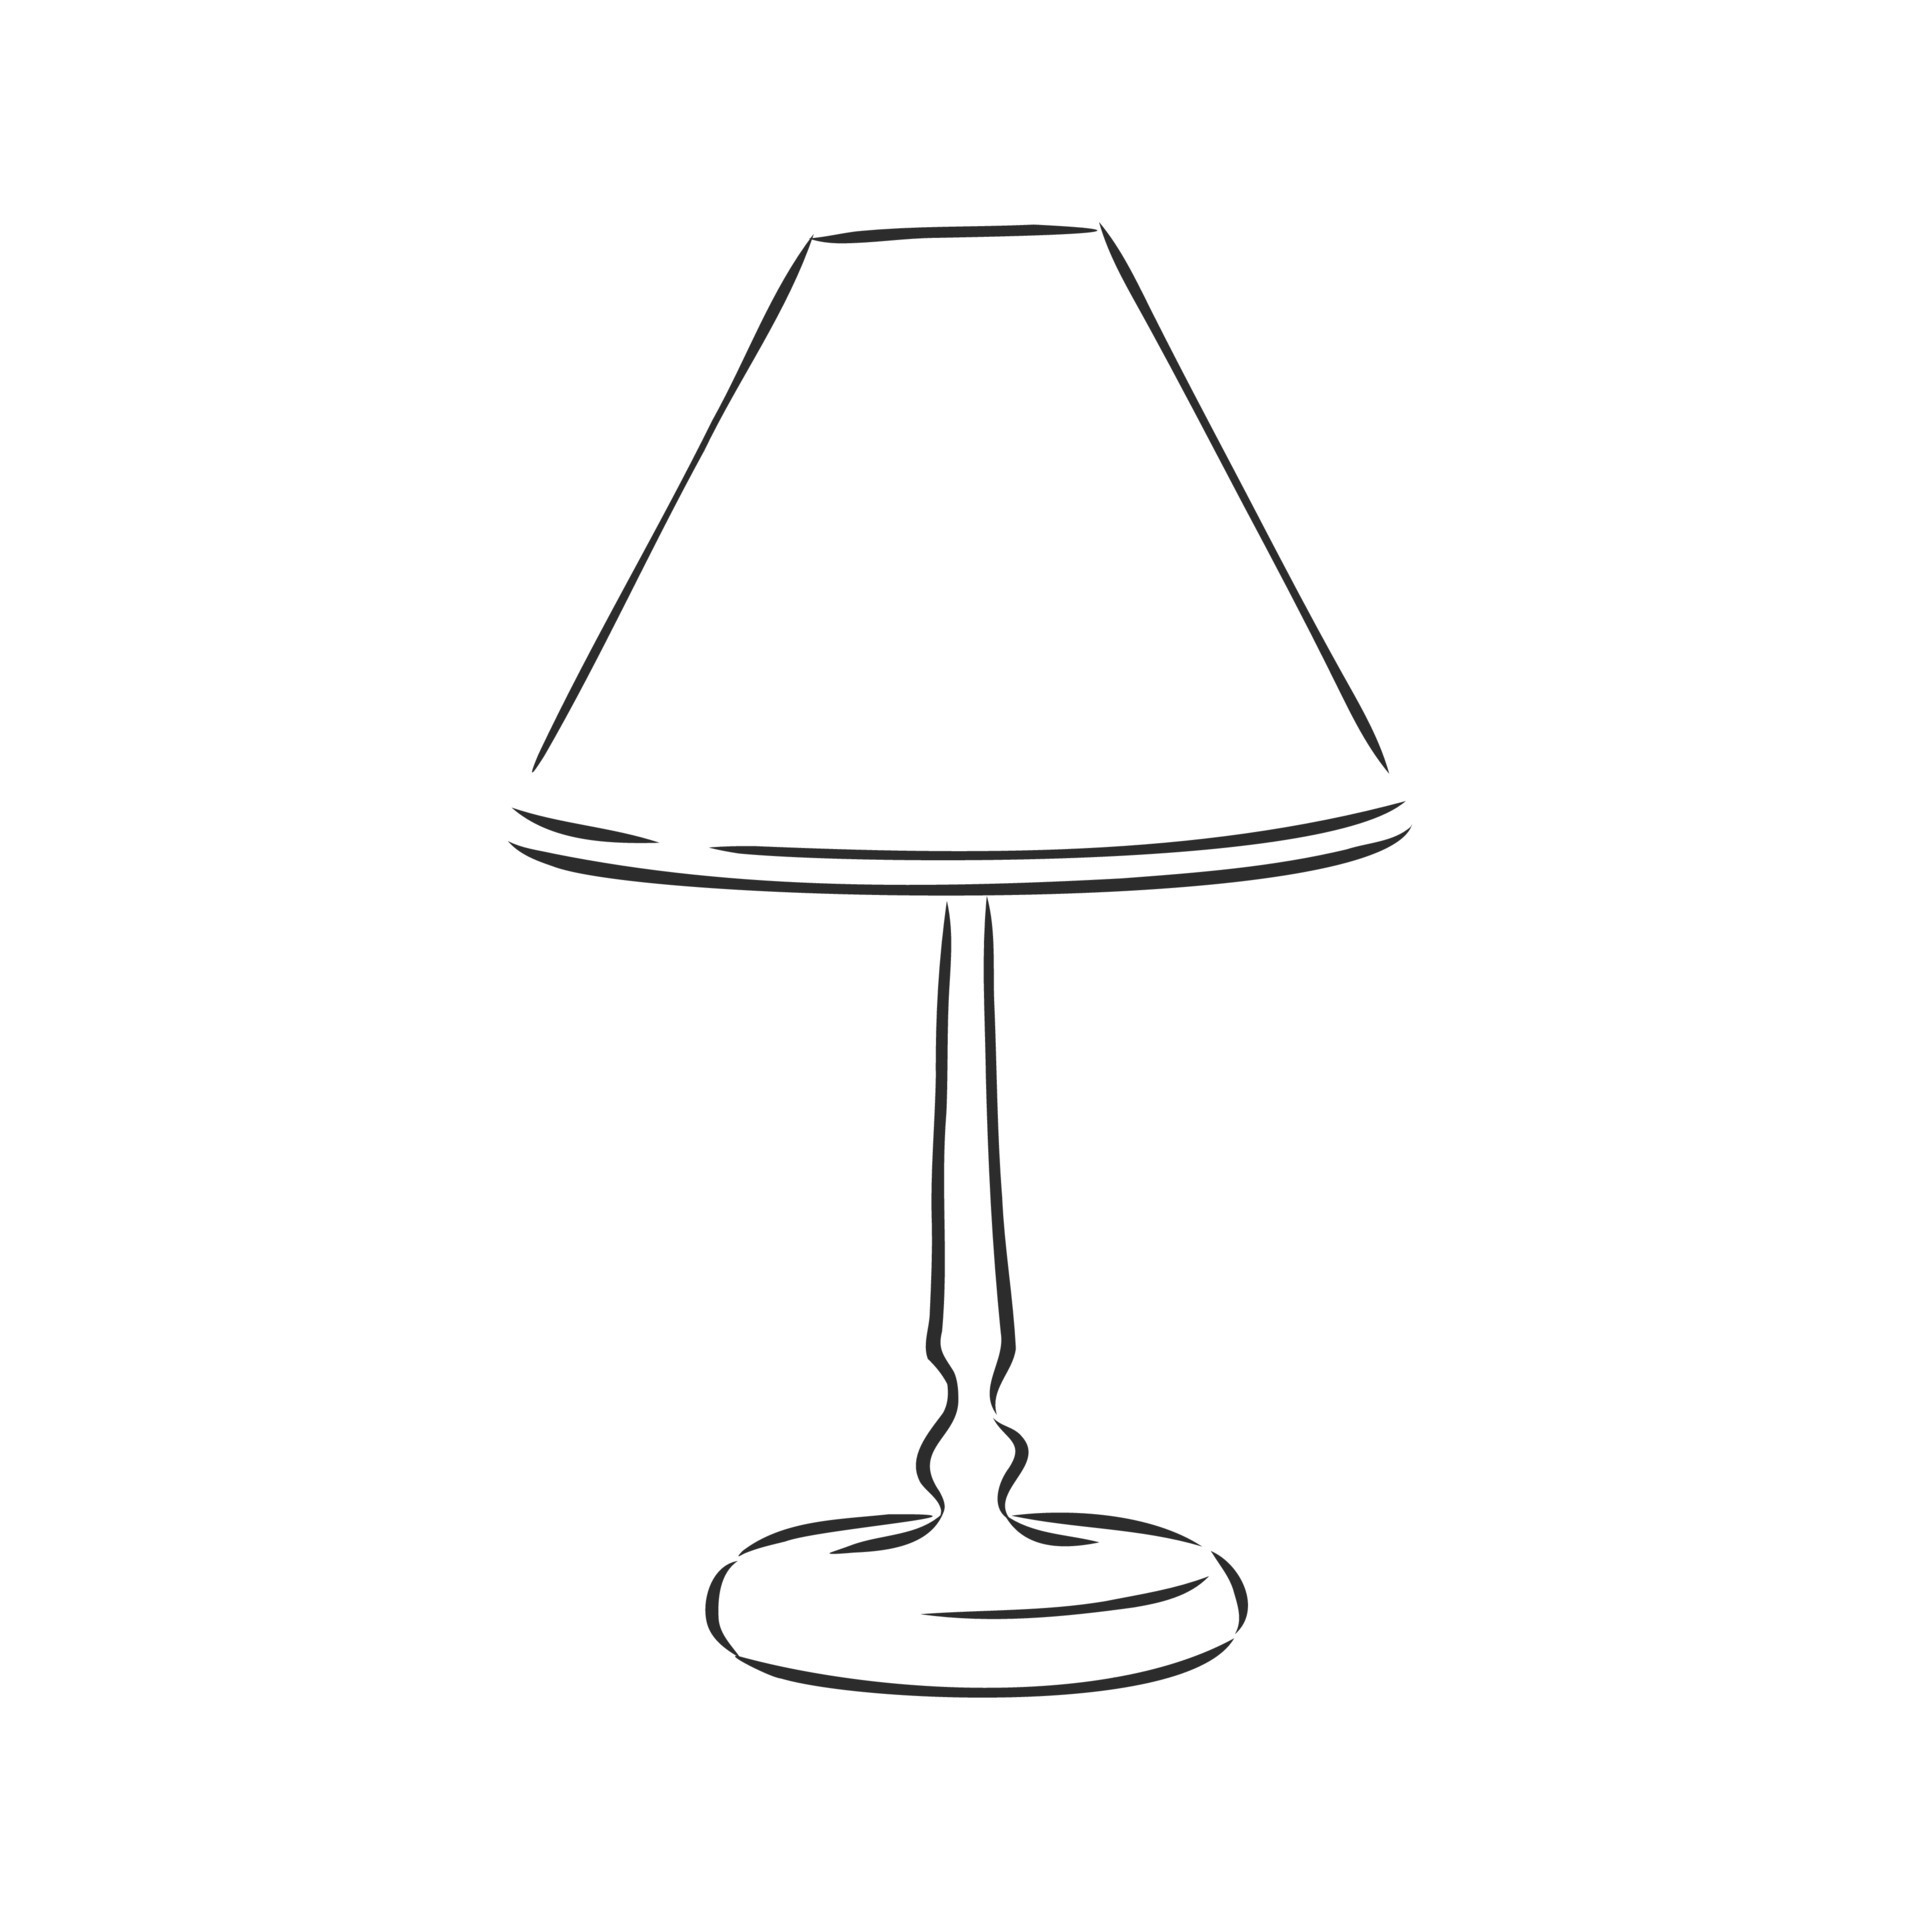 Buy M2 Look Round Conical Shade Modern Premium Designing Black Metal Base  Table Lamp for Bedroom  Living Room  Home Decoration  Drawing Room   Study Room  Bedside  Gifting